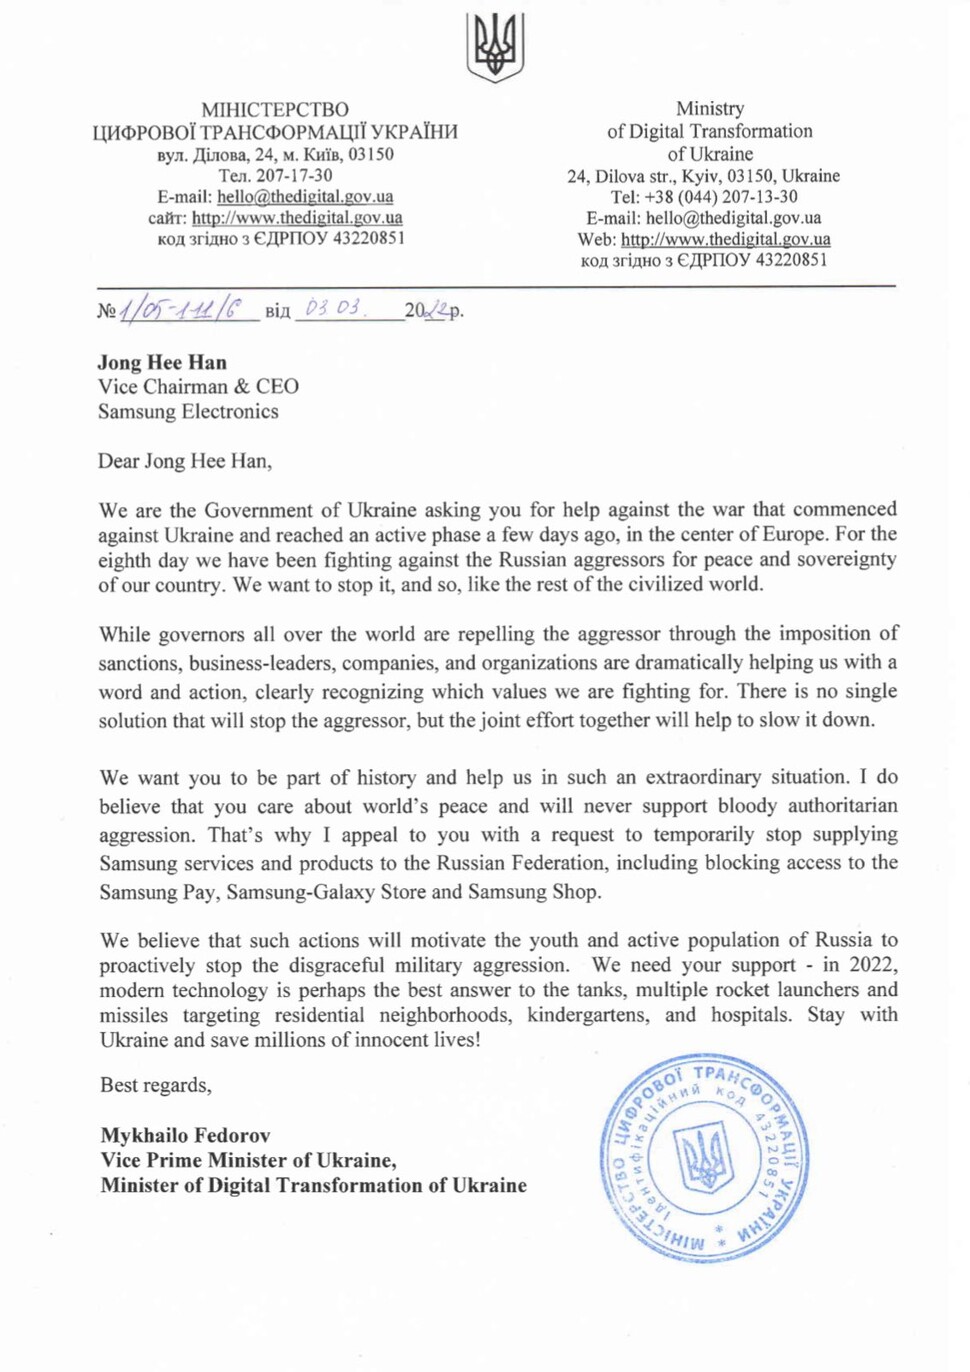 The letter sent by Mykhailo Fedorov, Ukraine’s digital minister, to Han Jong-hee, the vice chairman of Samsung Electronics. (from Fedorov’s Twitter page)